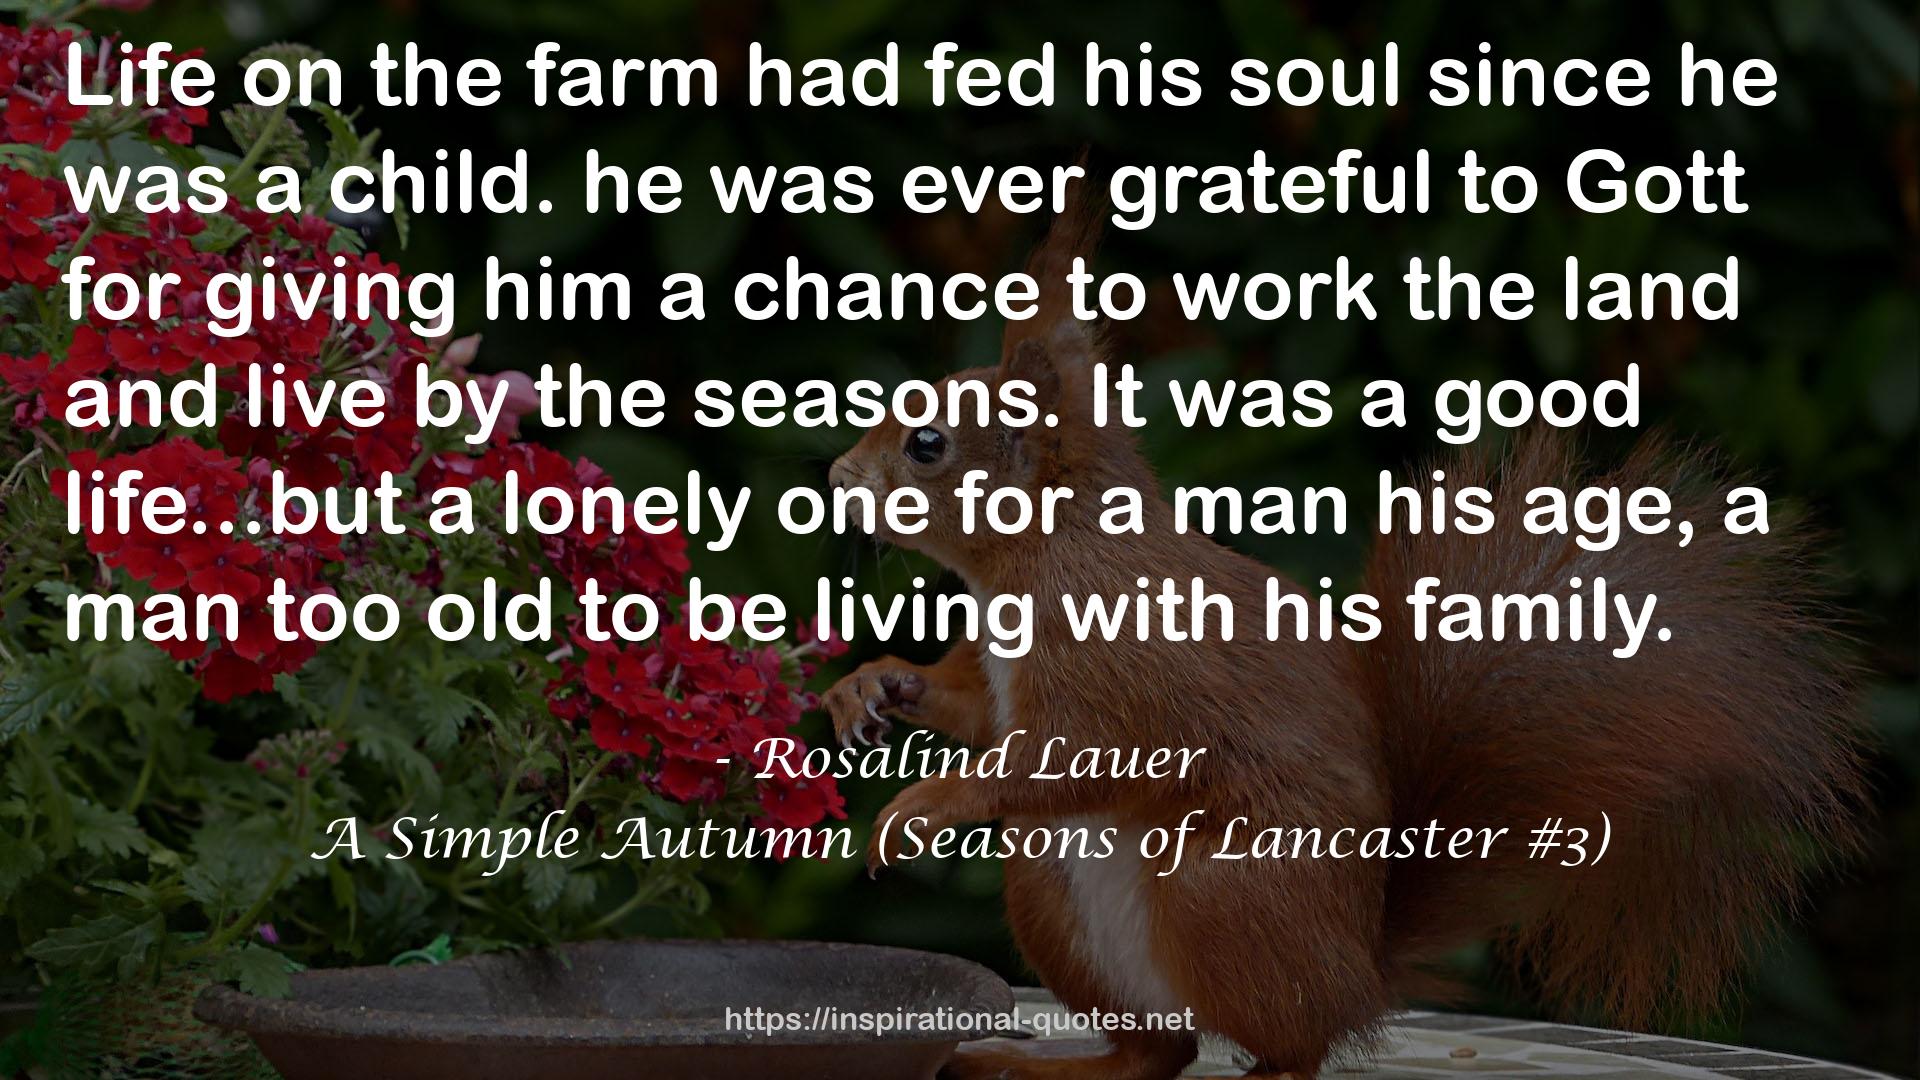 A Simple Autumn (Seasons of Lancaster #3) QUOTES